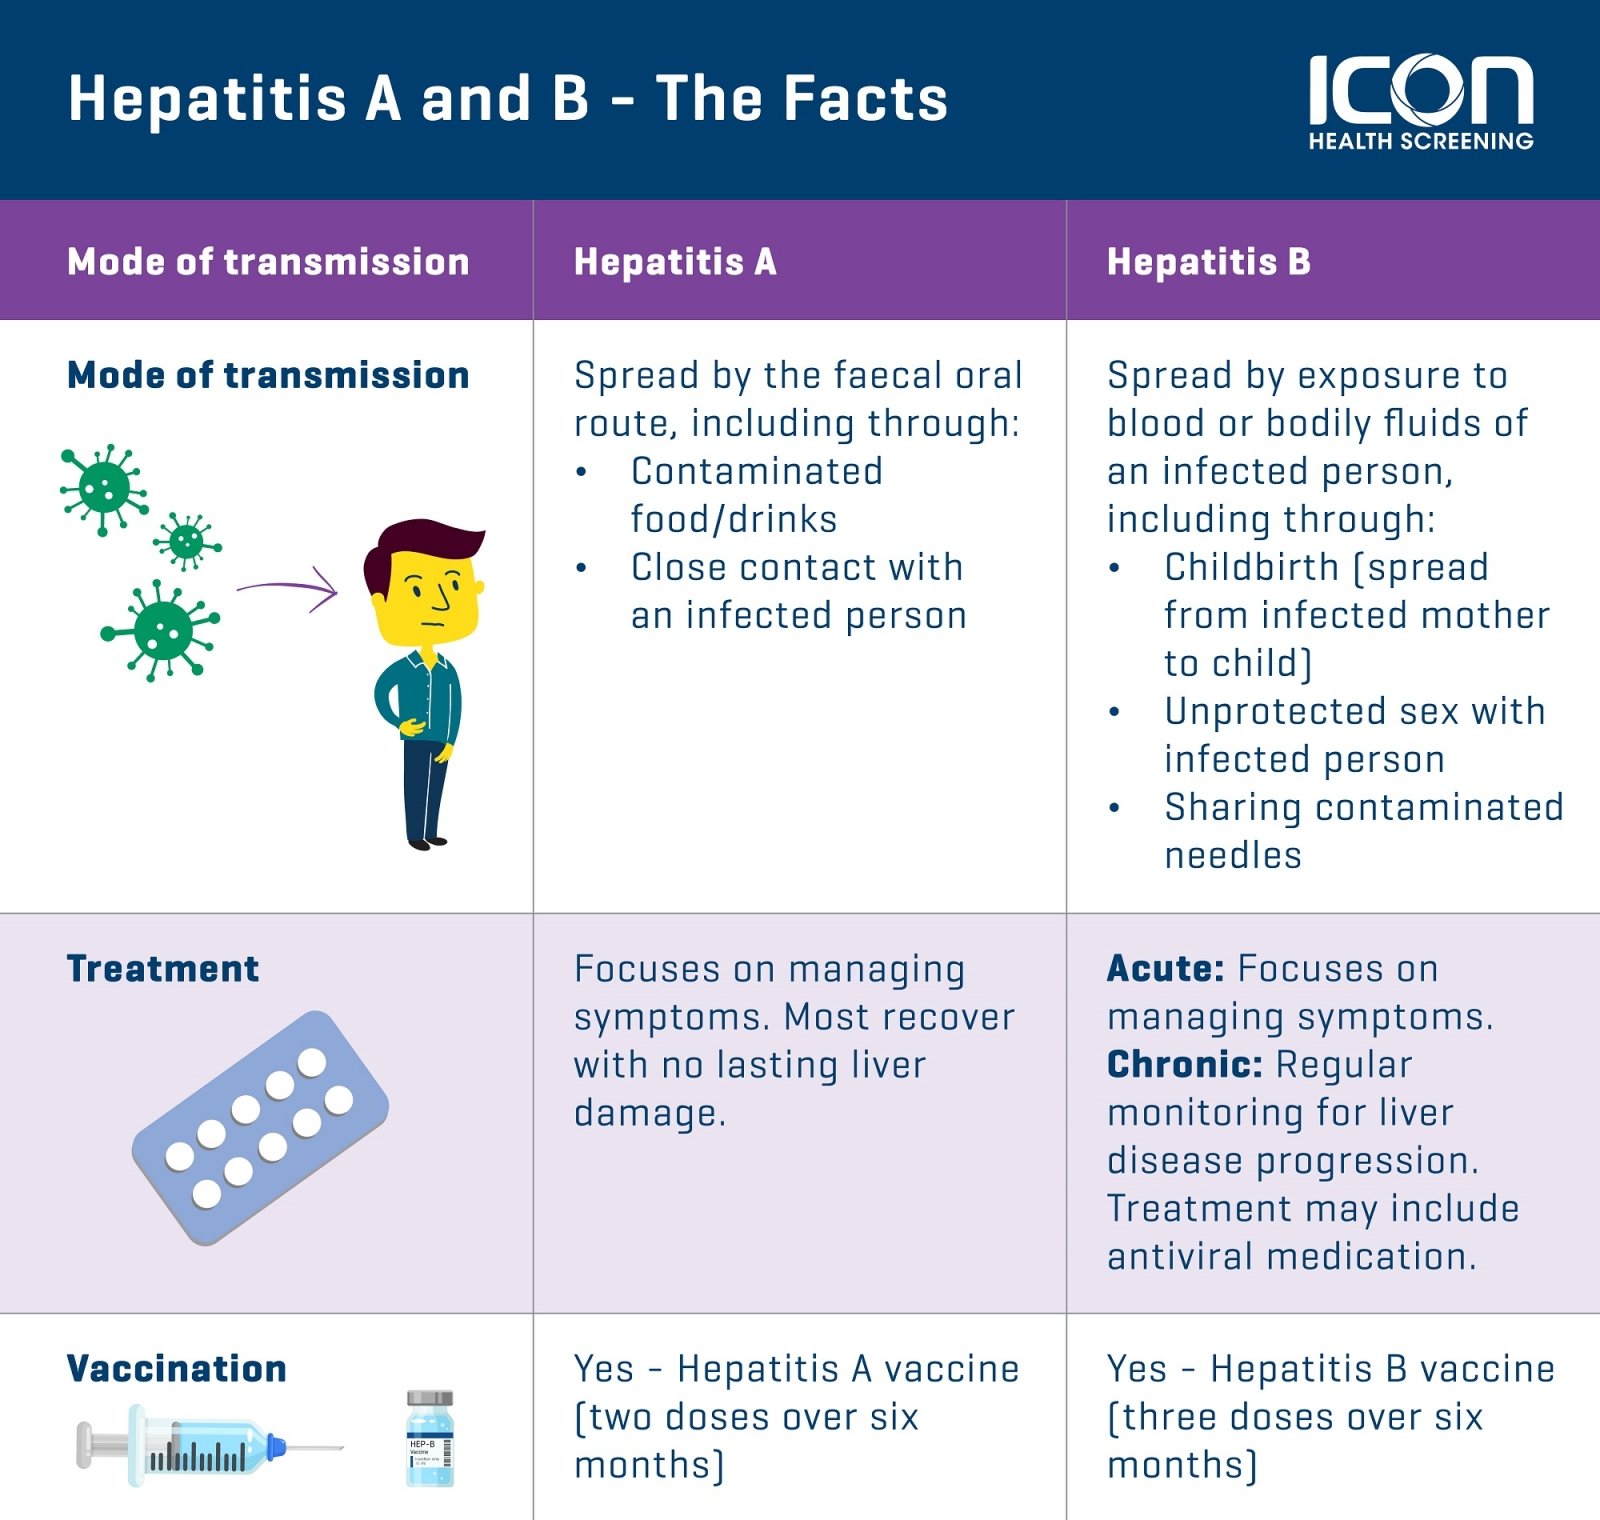 What Should I Do If I Have Hepatitis B